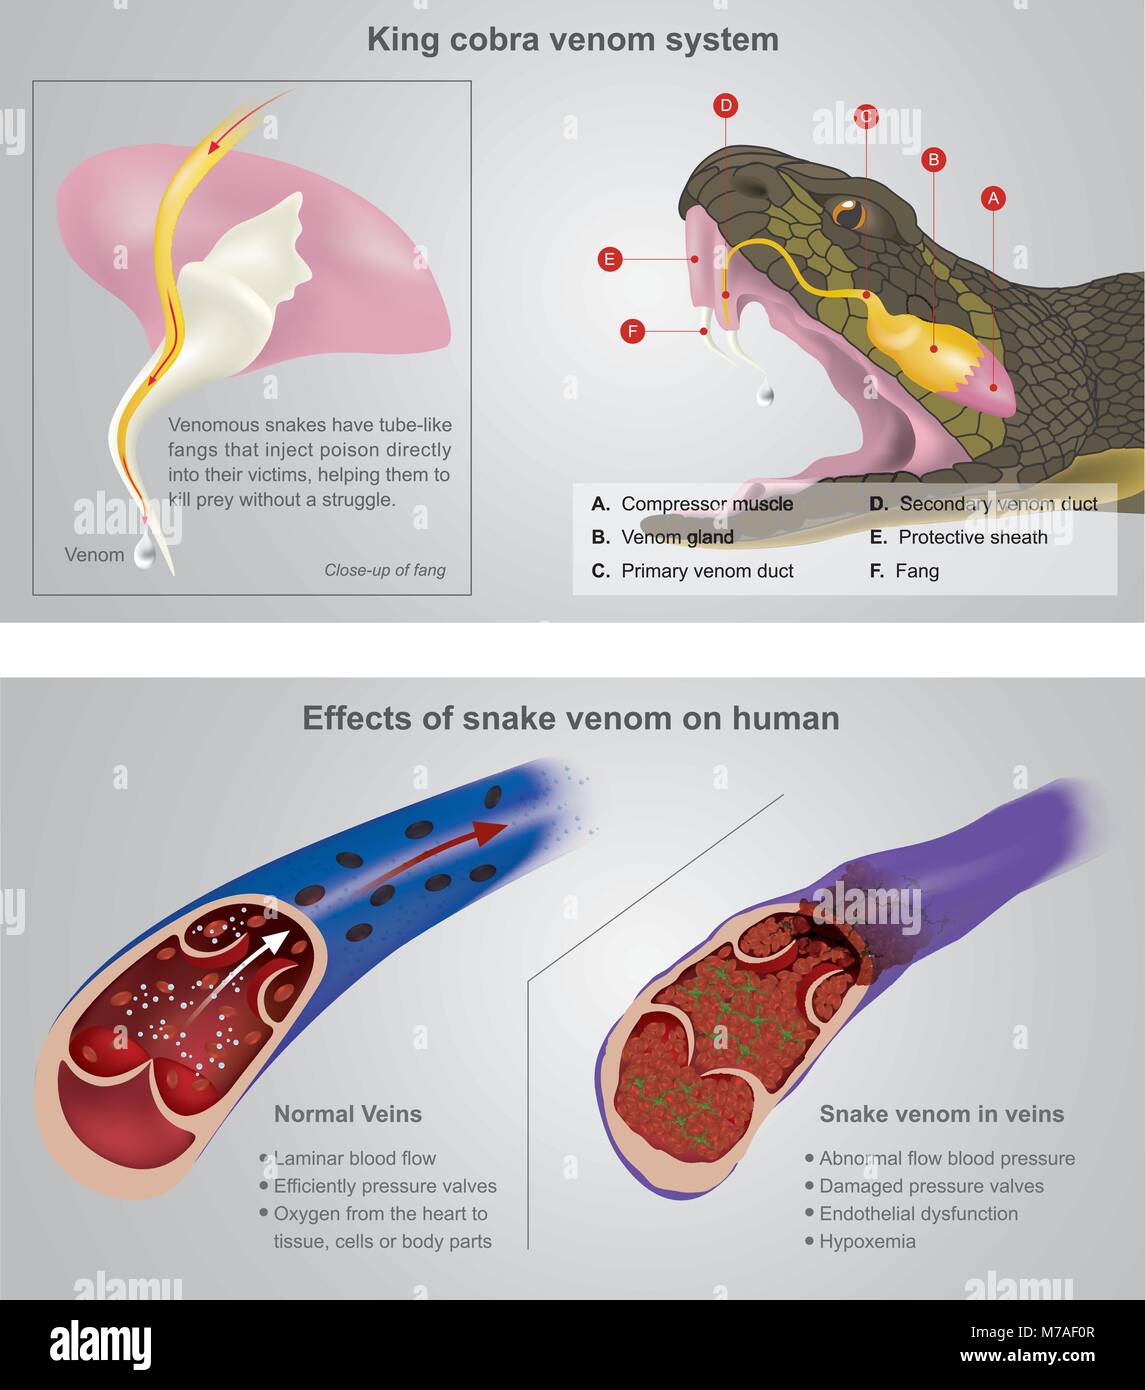 King cobra venom system. Venomous snakes have tube-like fangs that inject poison directly into their victims help them to kill prey without a struggle Stock Vector